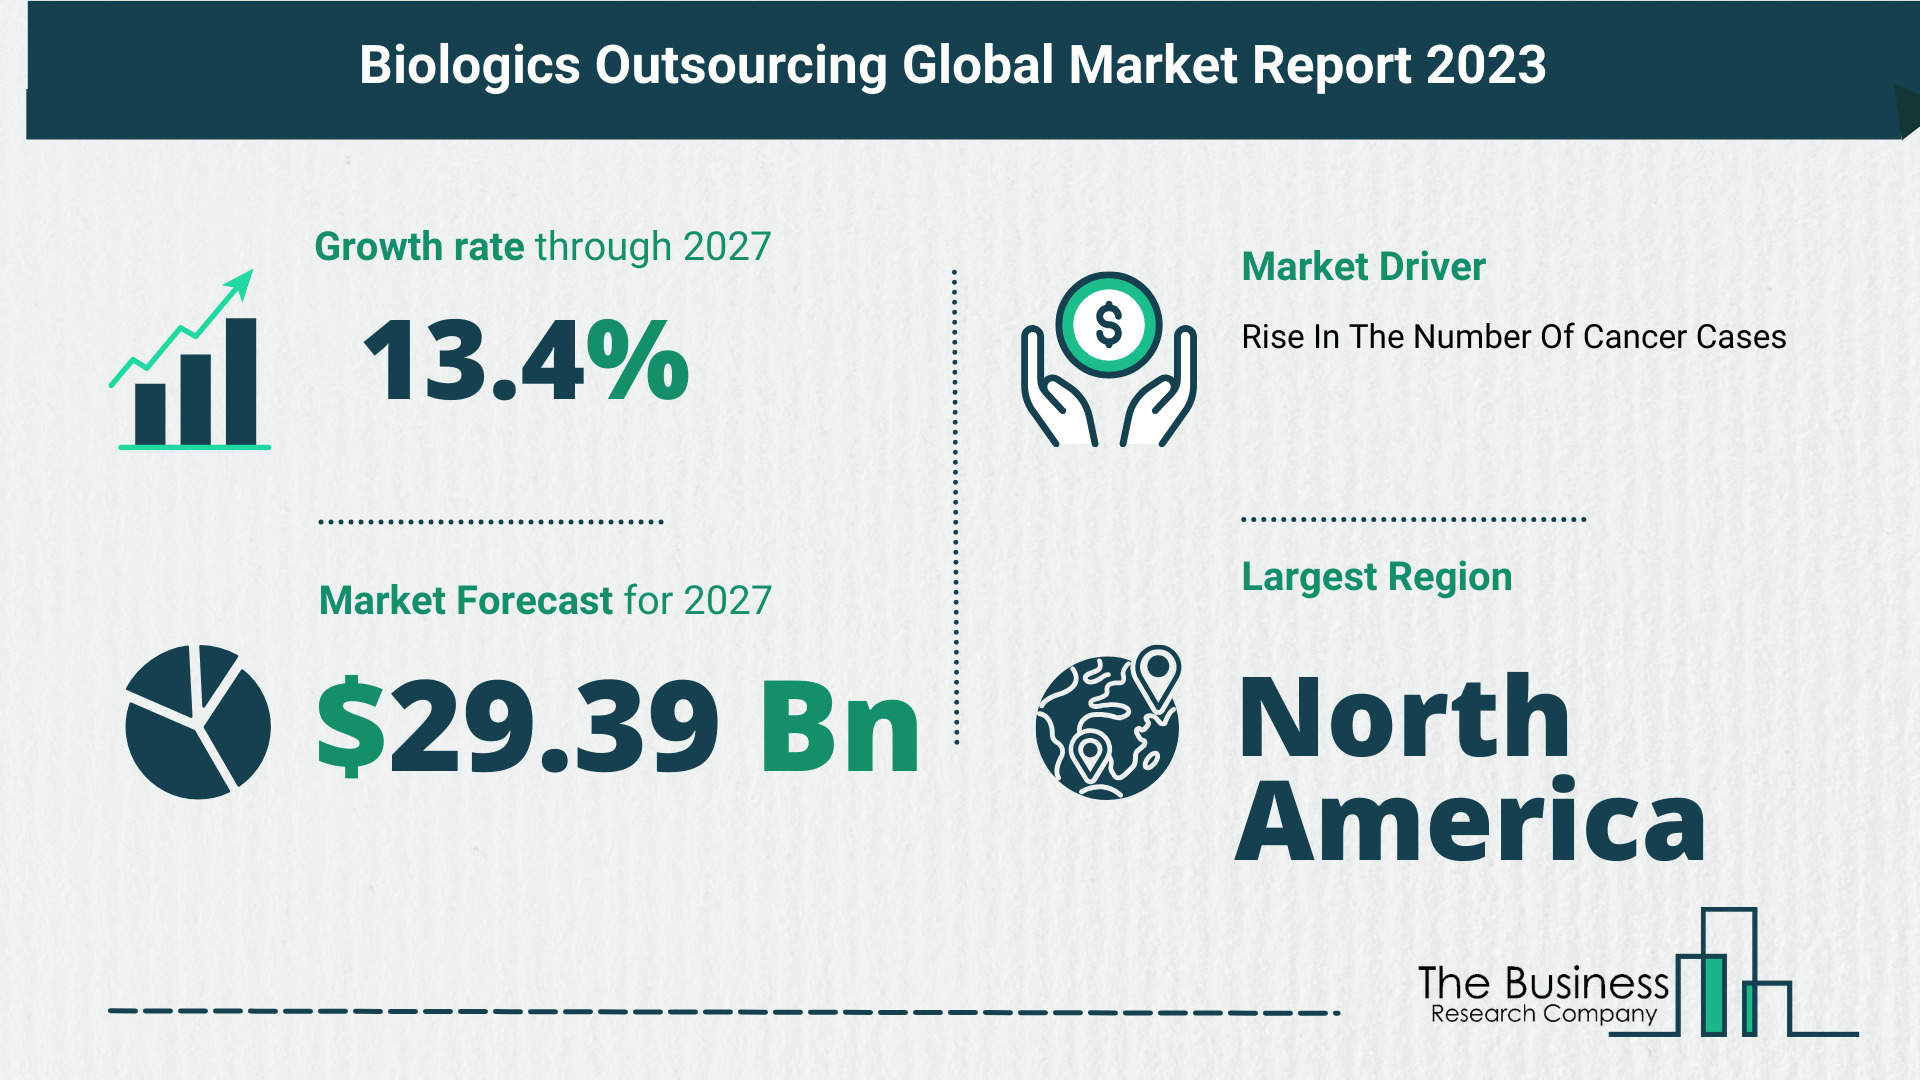 Top 5 Insights From The Biologics Outsourcing Market Report 2023